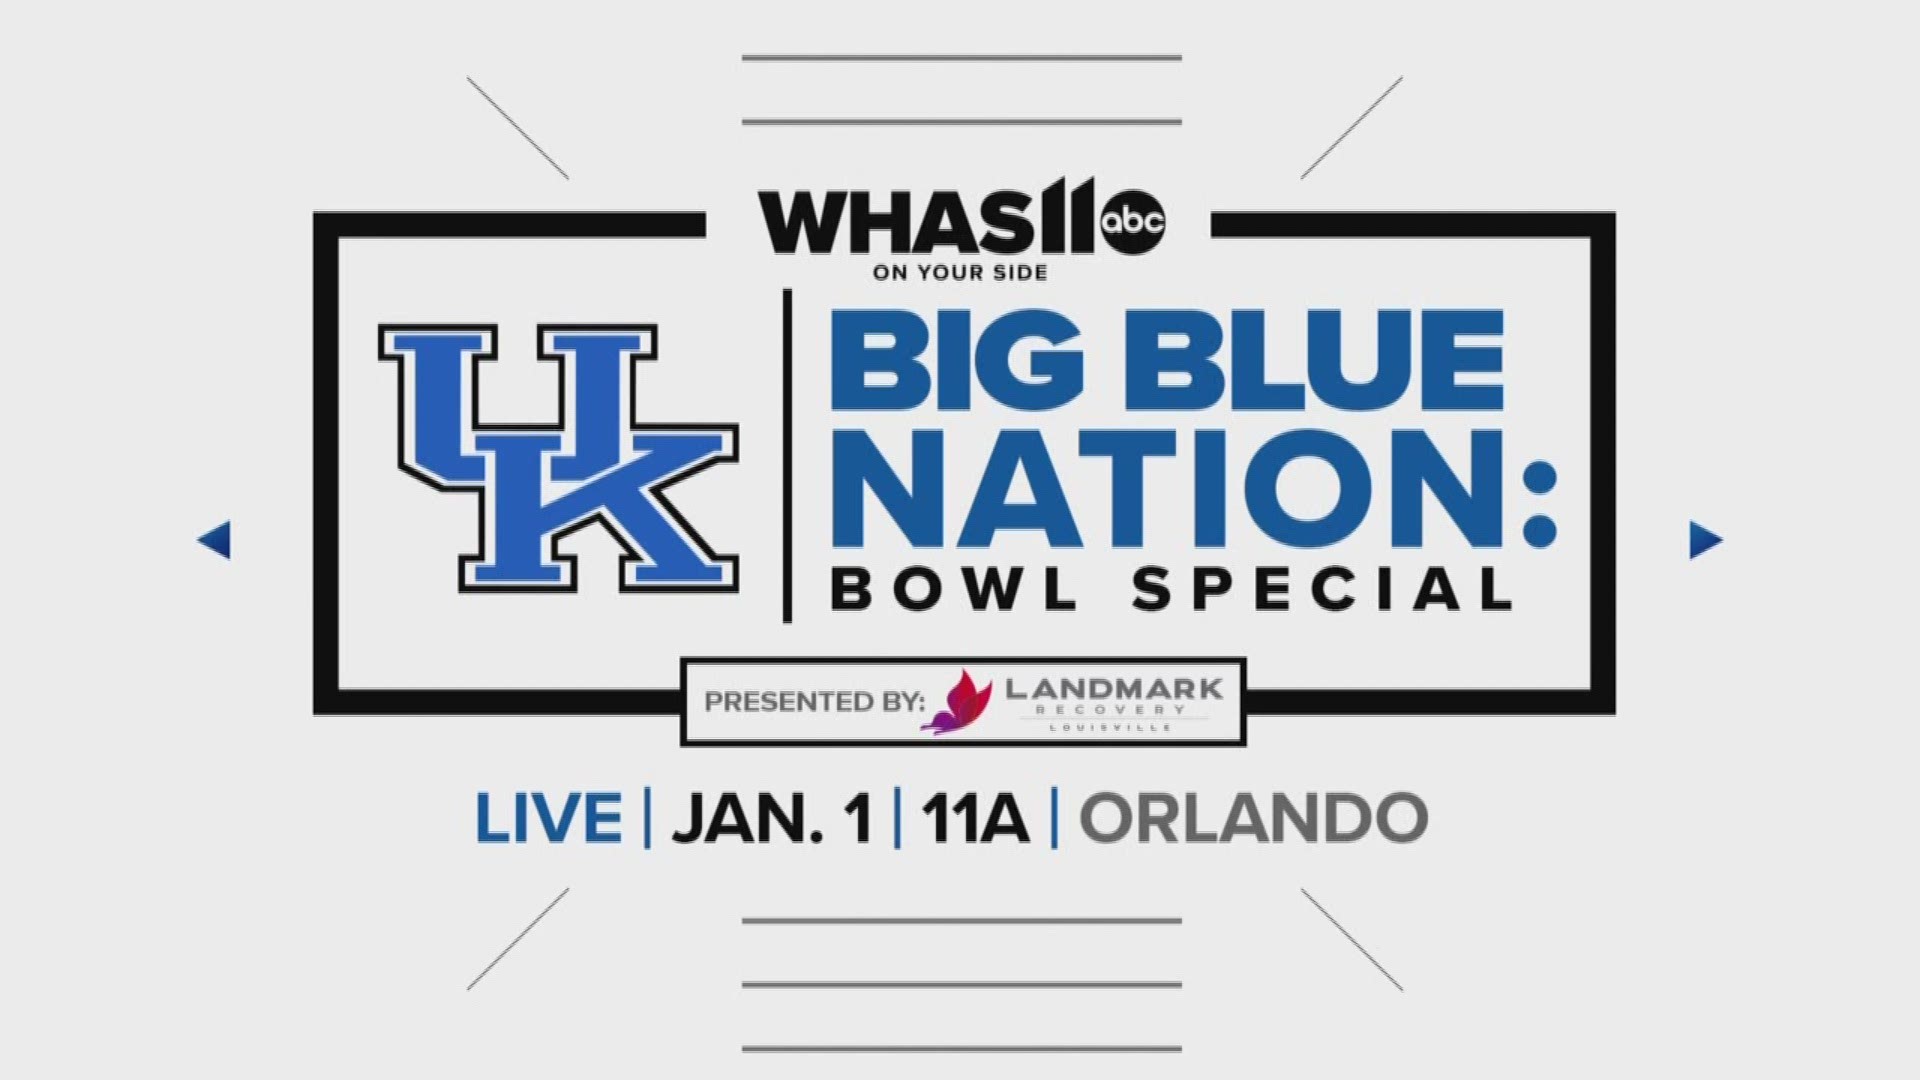 Kent Spencer is in Orlando with the University of Kentucky Wildcats as they prepare for the Citrus Bowl